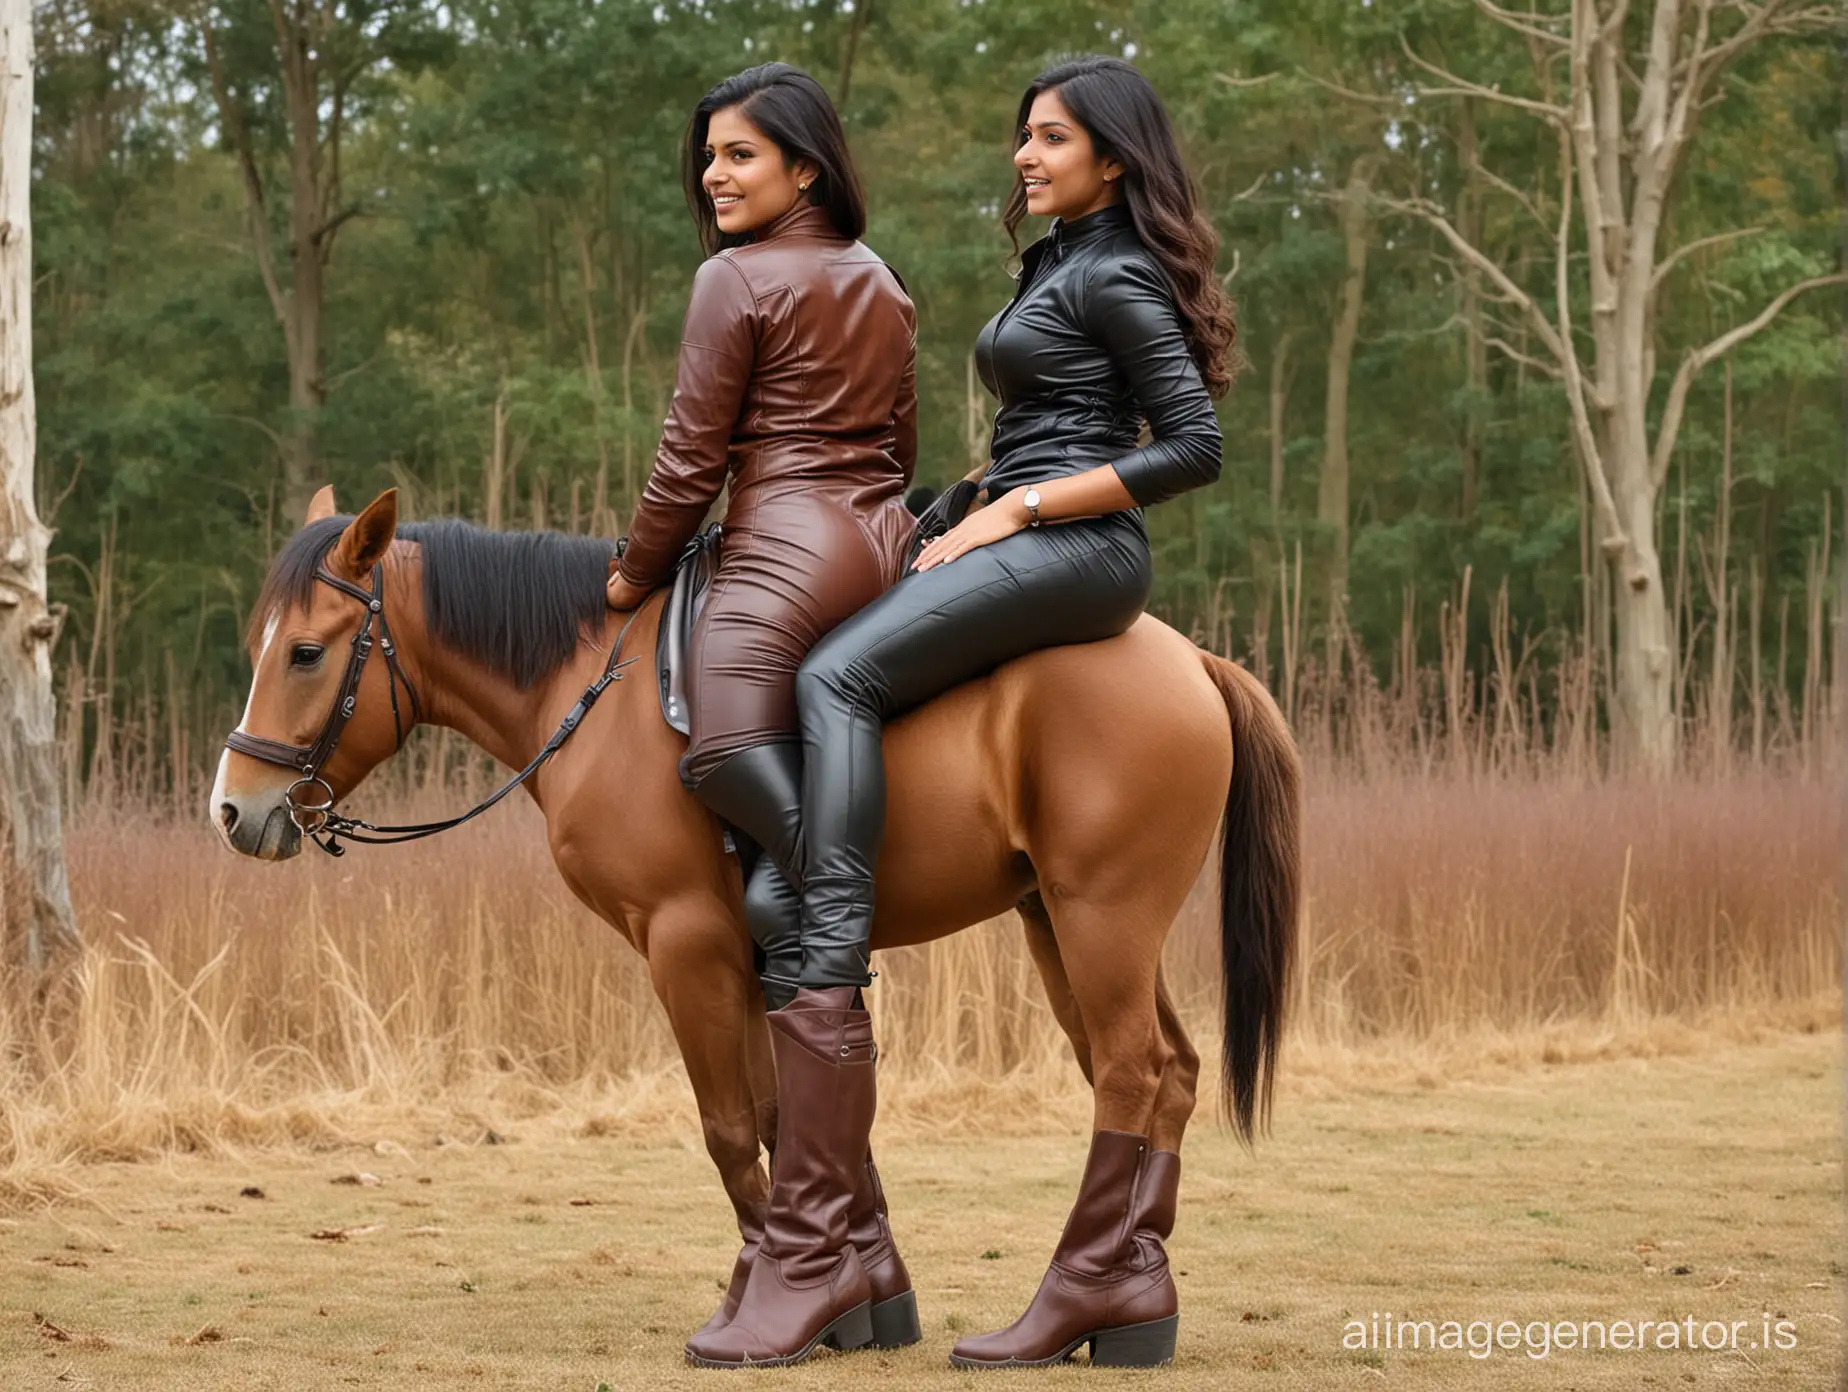 Indian-Woman-in-Leather-Bodysuit-with-Riding-Boots-Displaying-Thick-Extra-Large-Butt